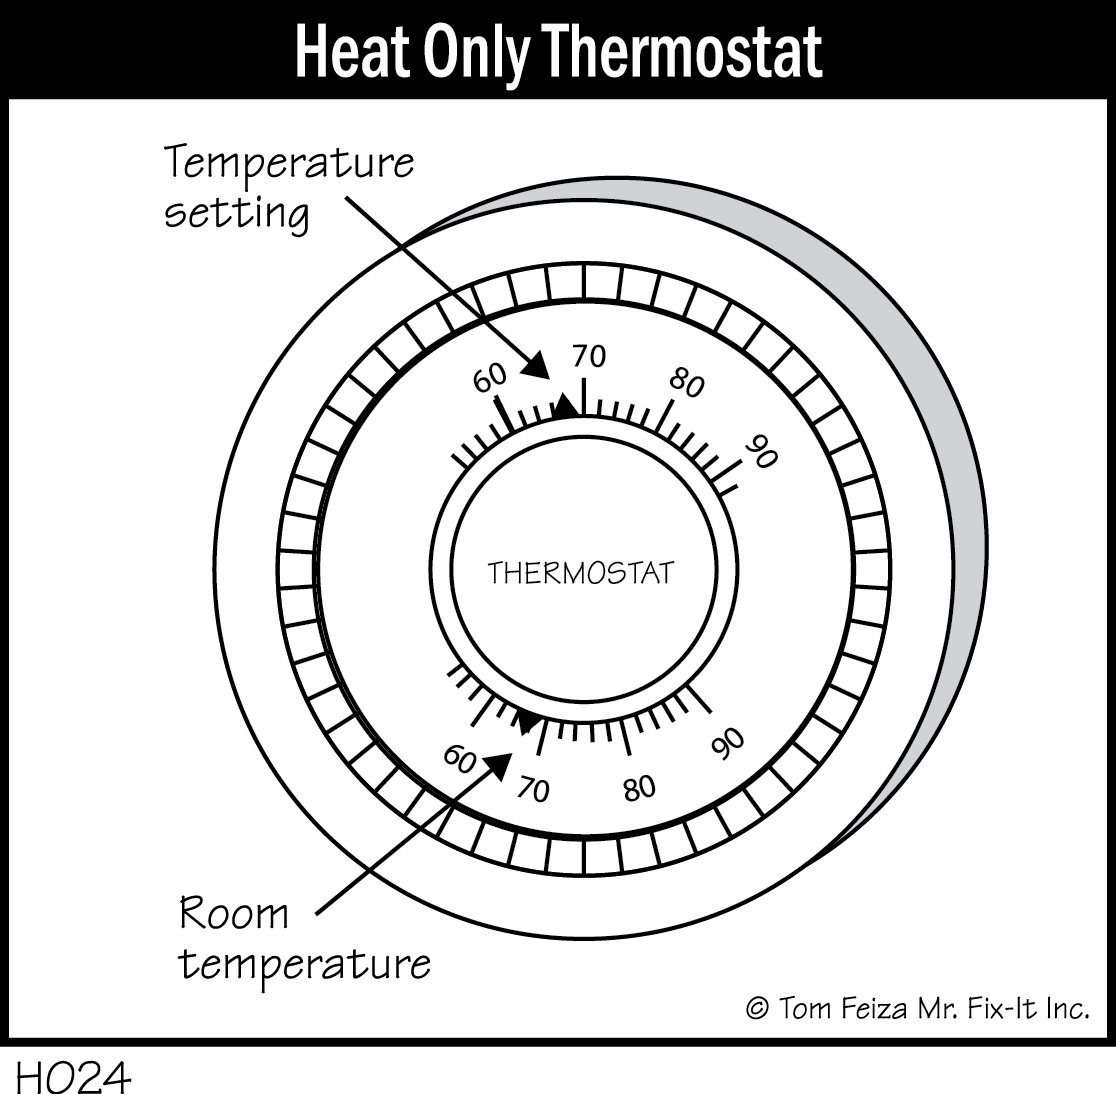 H024 - Heat Only Thermostat